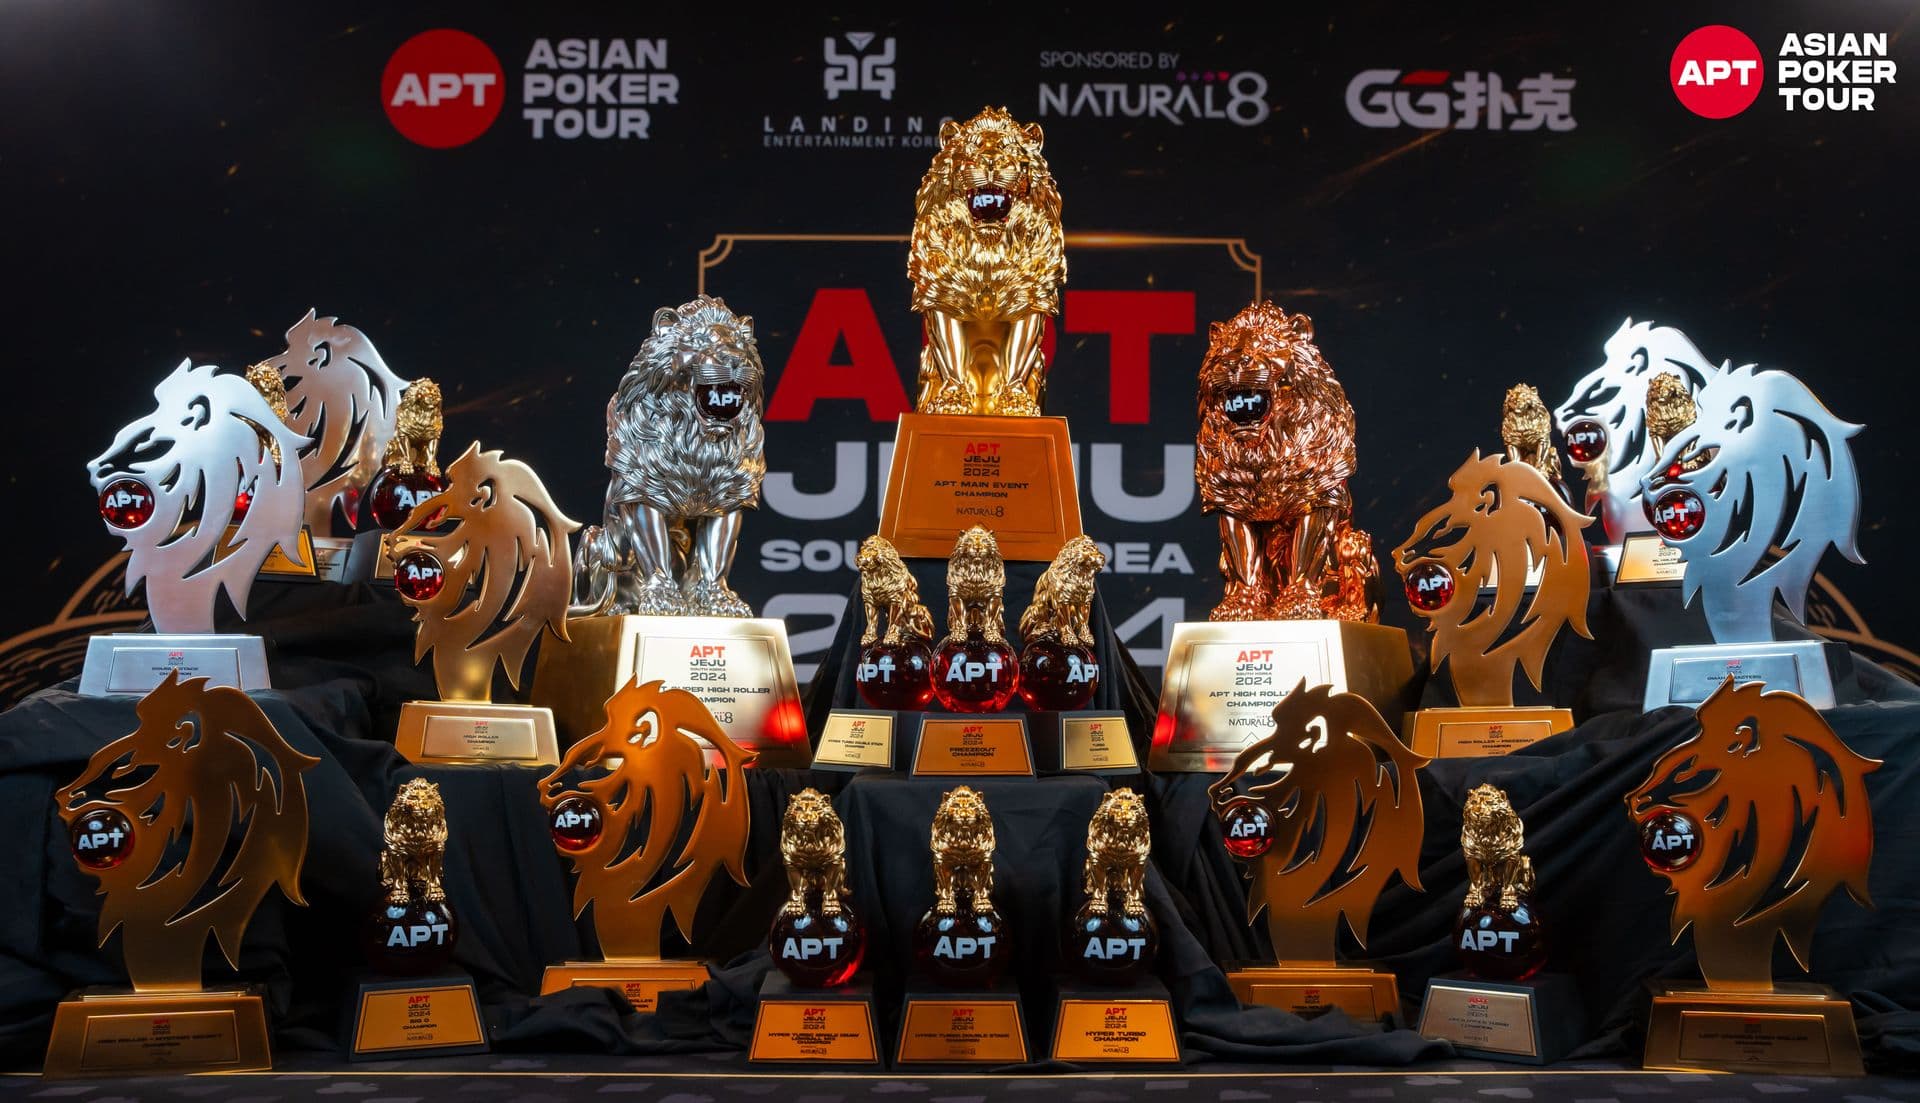 APT’s Largest & Richest South Korean Poker Series Concludes on a High with Natural8 Ambassador Eric "Six Poker" Tsai Claiming APT High Roller Title